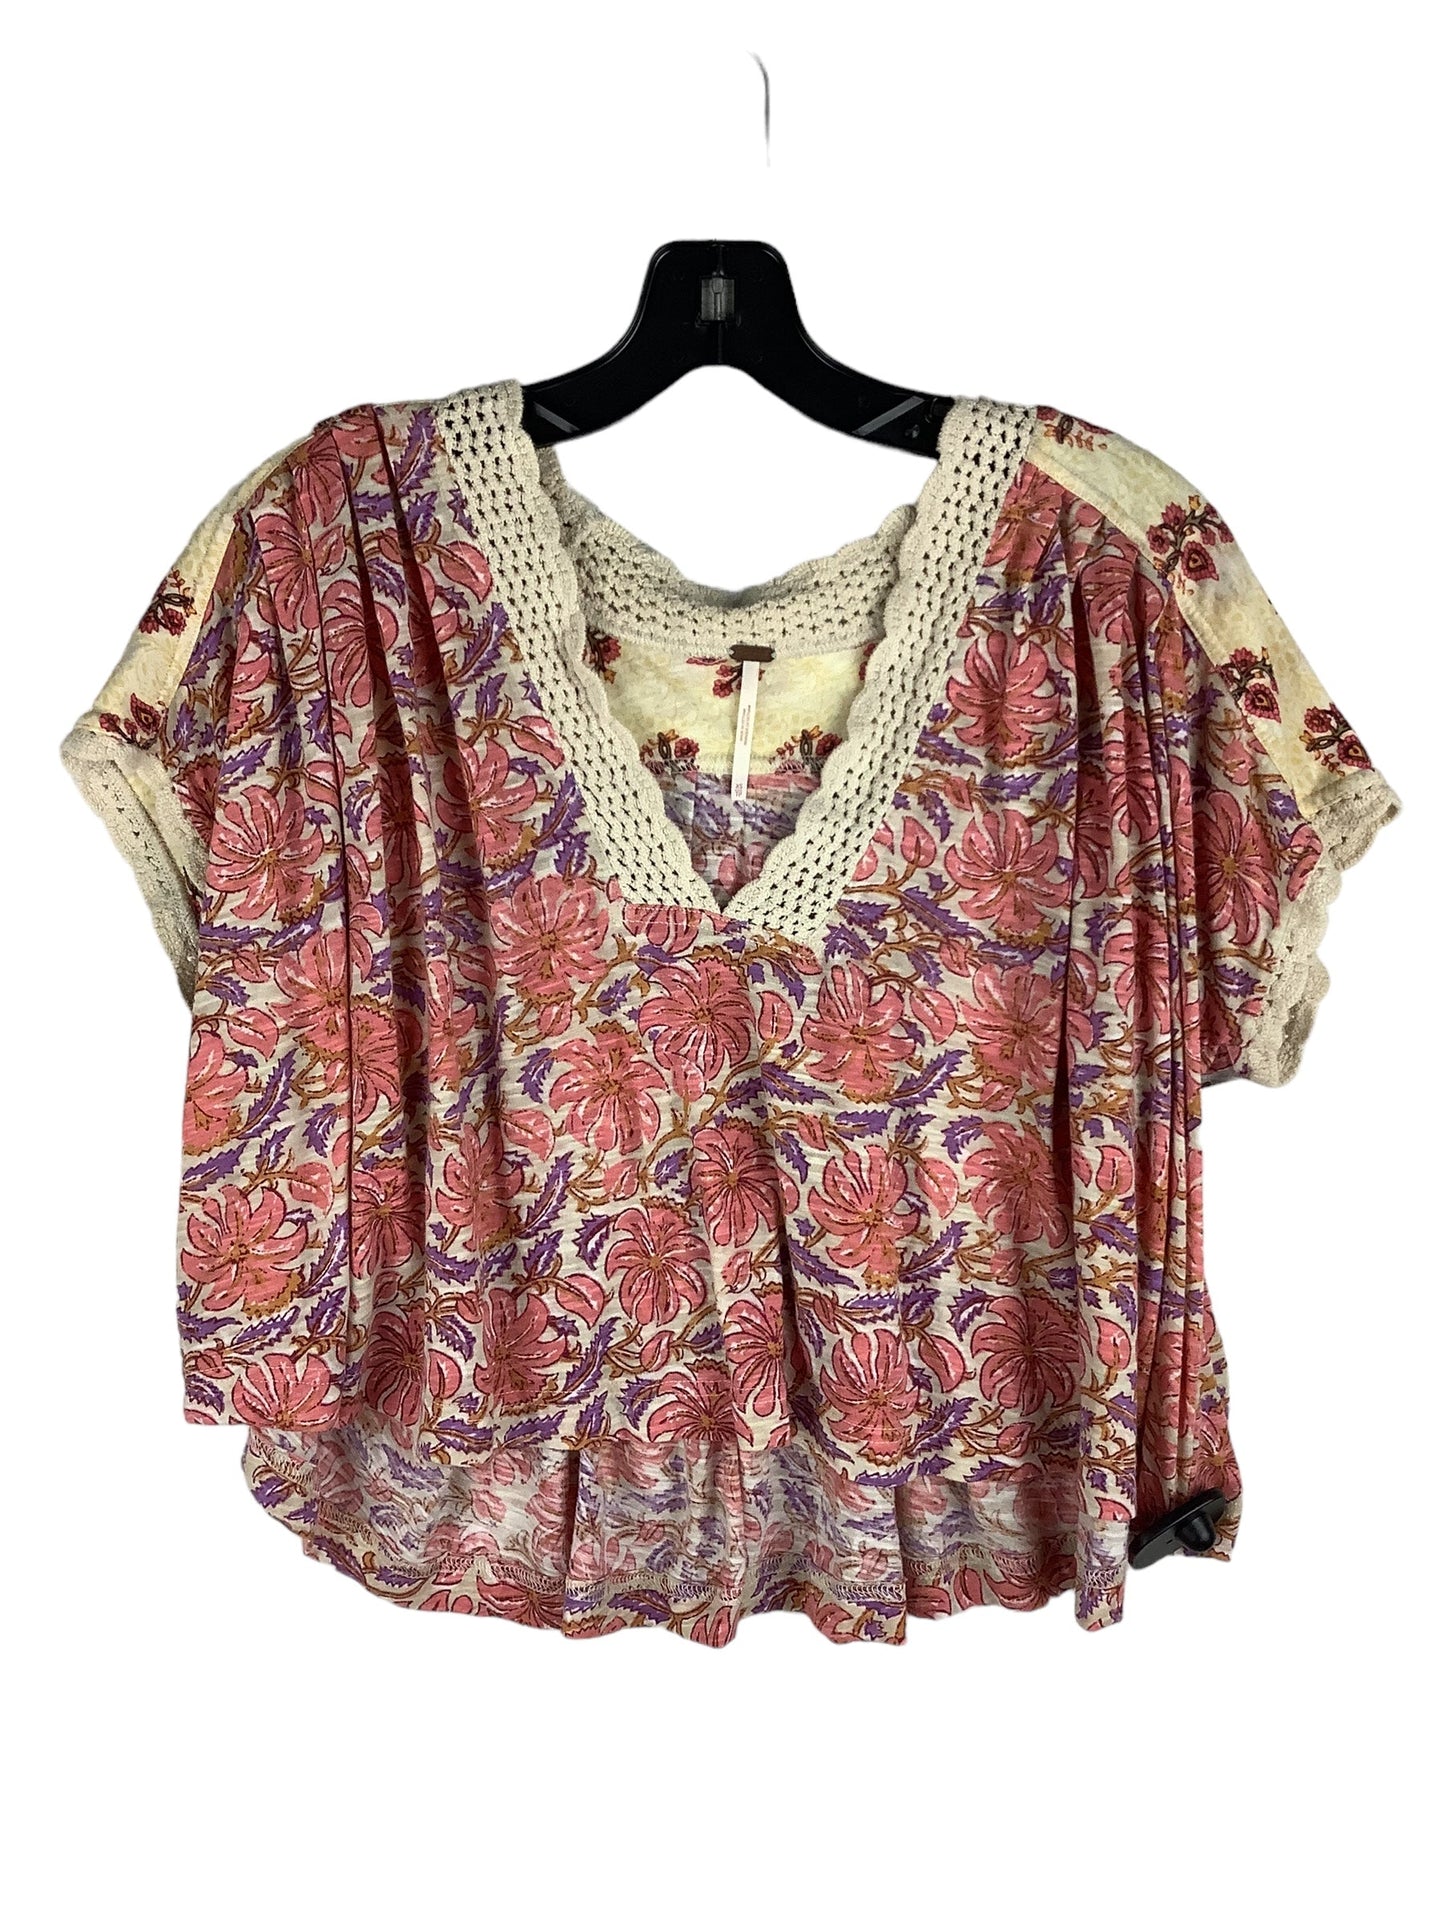 Floral Print Top Short Sleeve Free People, Size Xs